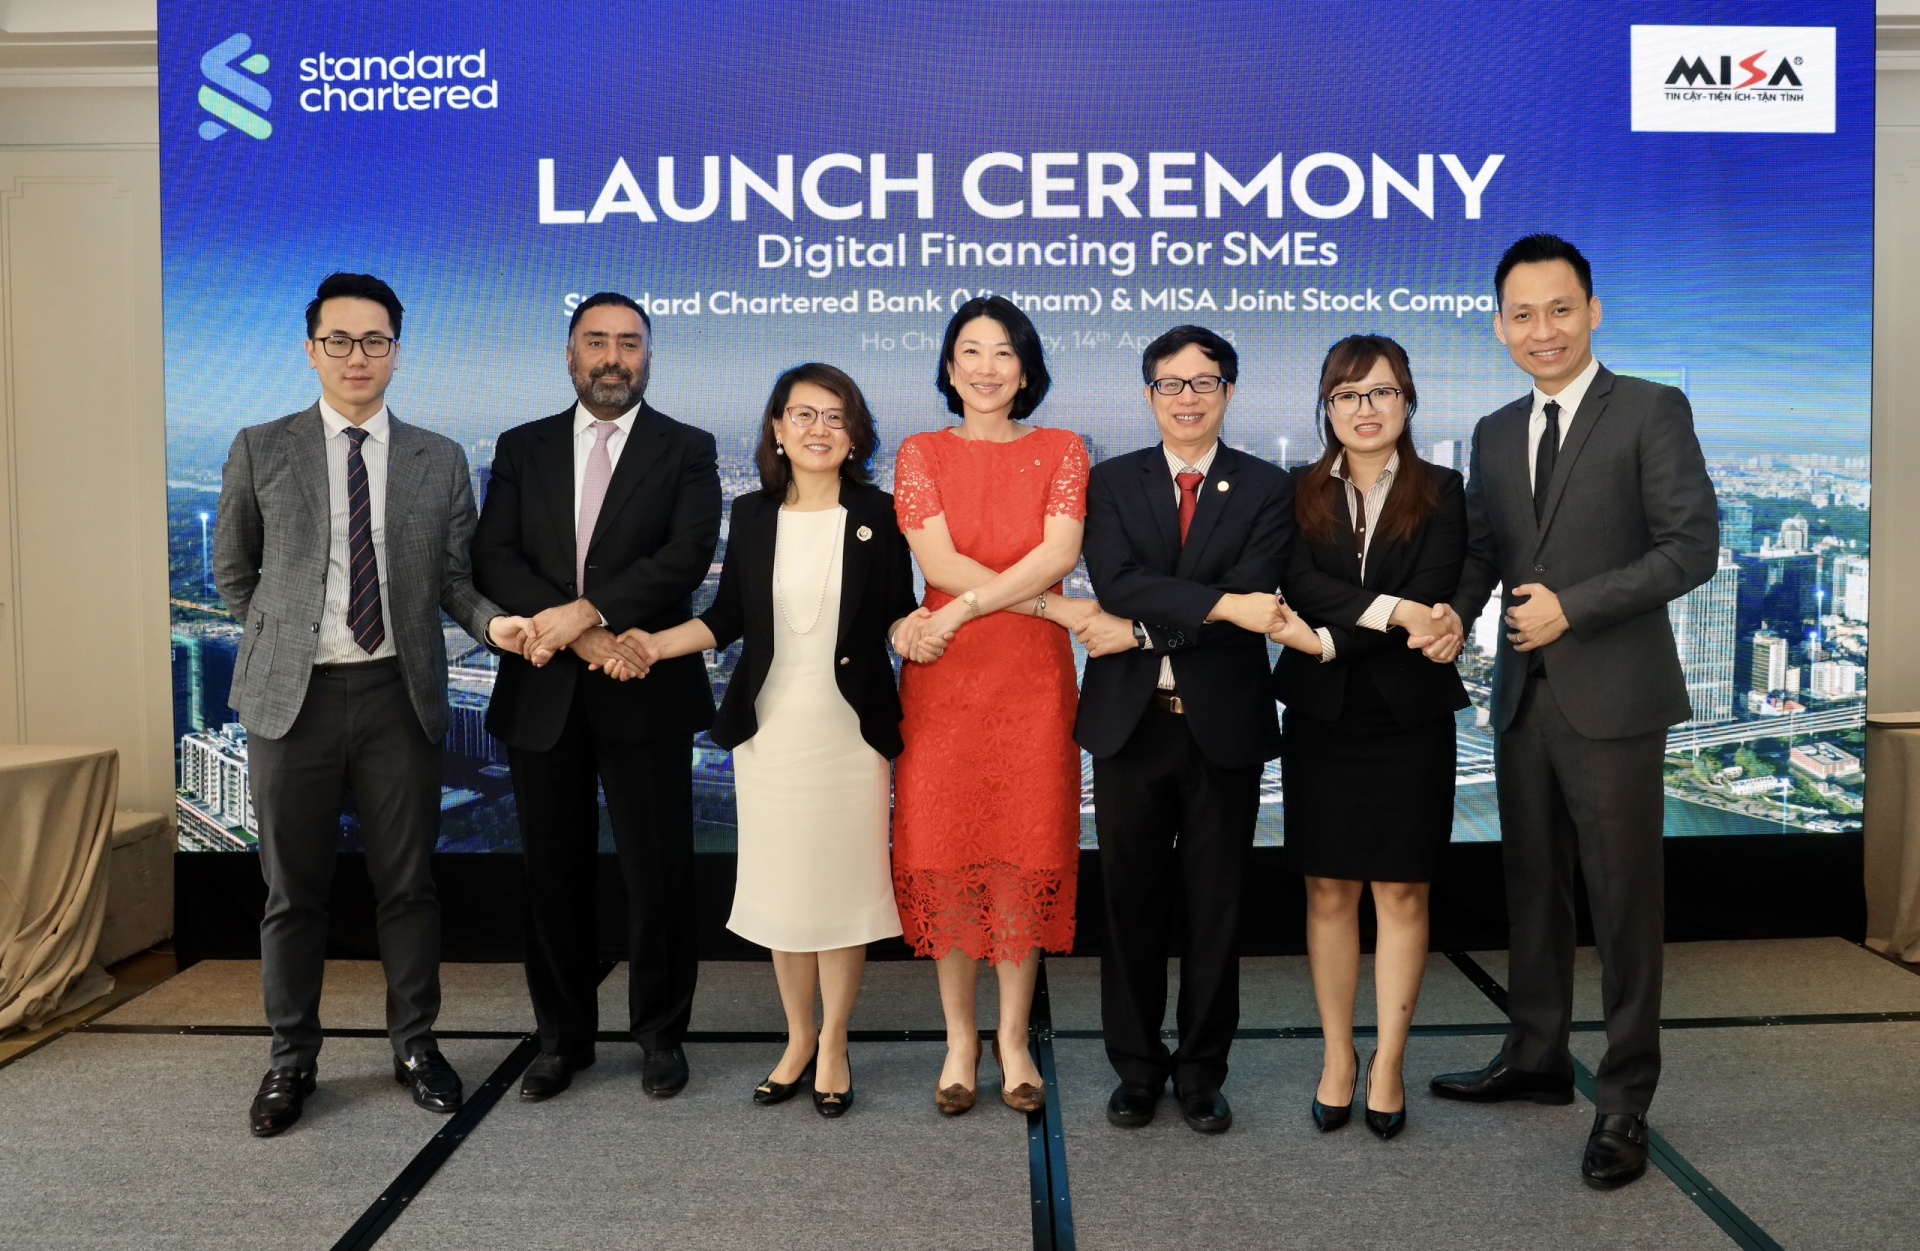 Standard Chartered Vietnam partners with MISA to launch digital financing for SMEs